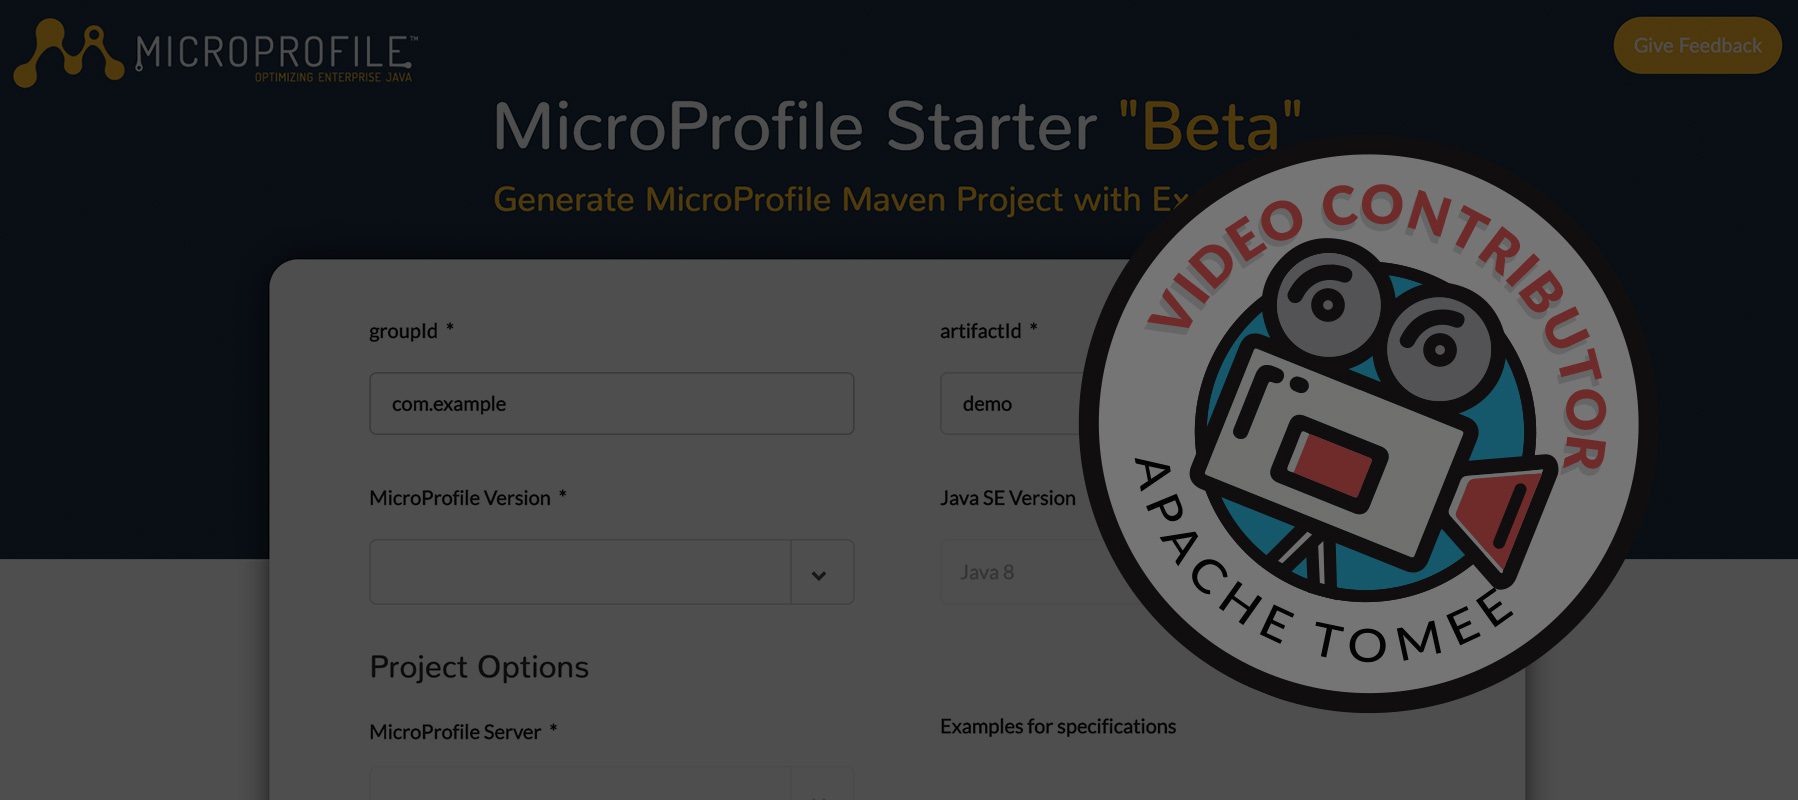 Creating MicroProfile Applications with TomEE by David Salter